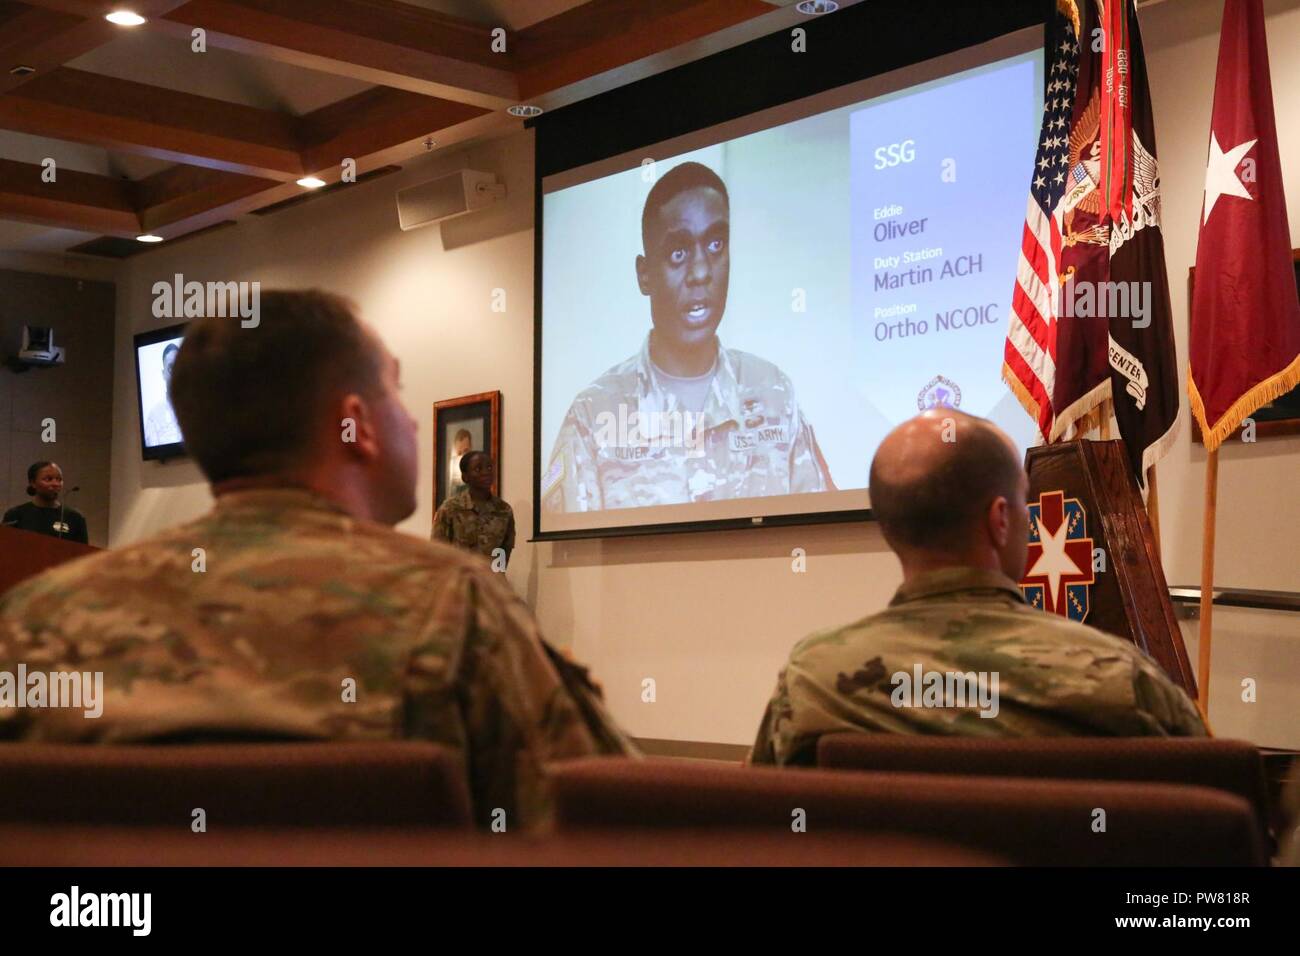 U.S. Army Sgt. Christopher Faulkner and Sgt. 1st Class Zachary Dispennette, assigned to the McDonald Army Health Center, watch the Best Medic Video during the 2017 Best Medic Competition Award Ceremony at Fort Bragg, N.C., Sept. 20, 2017. The competition tested the physical and mental toughness, as well as the technical competence, of each medic to identify the team moving forward to represent the region at the next level of the competition. Stock Photo